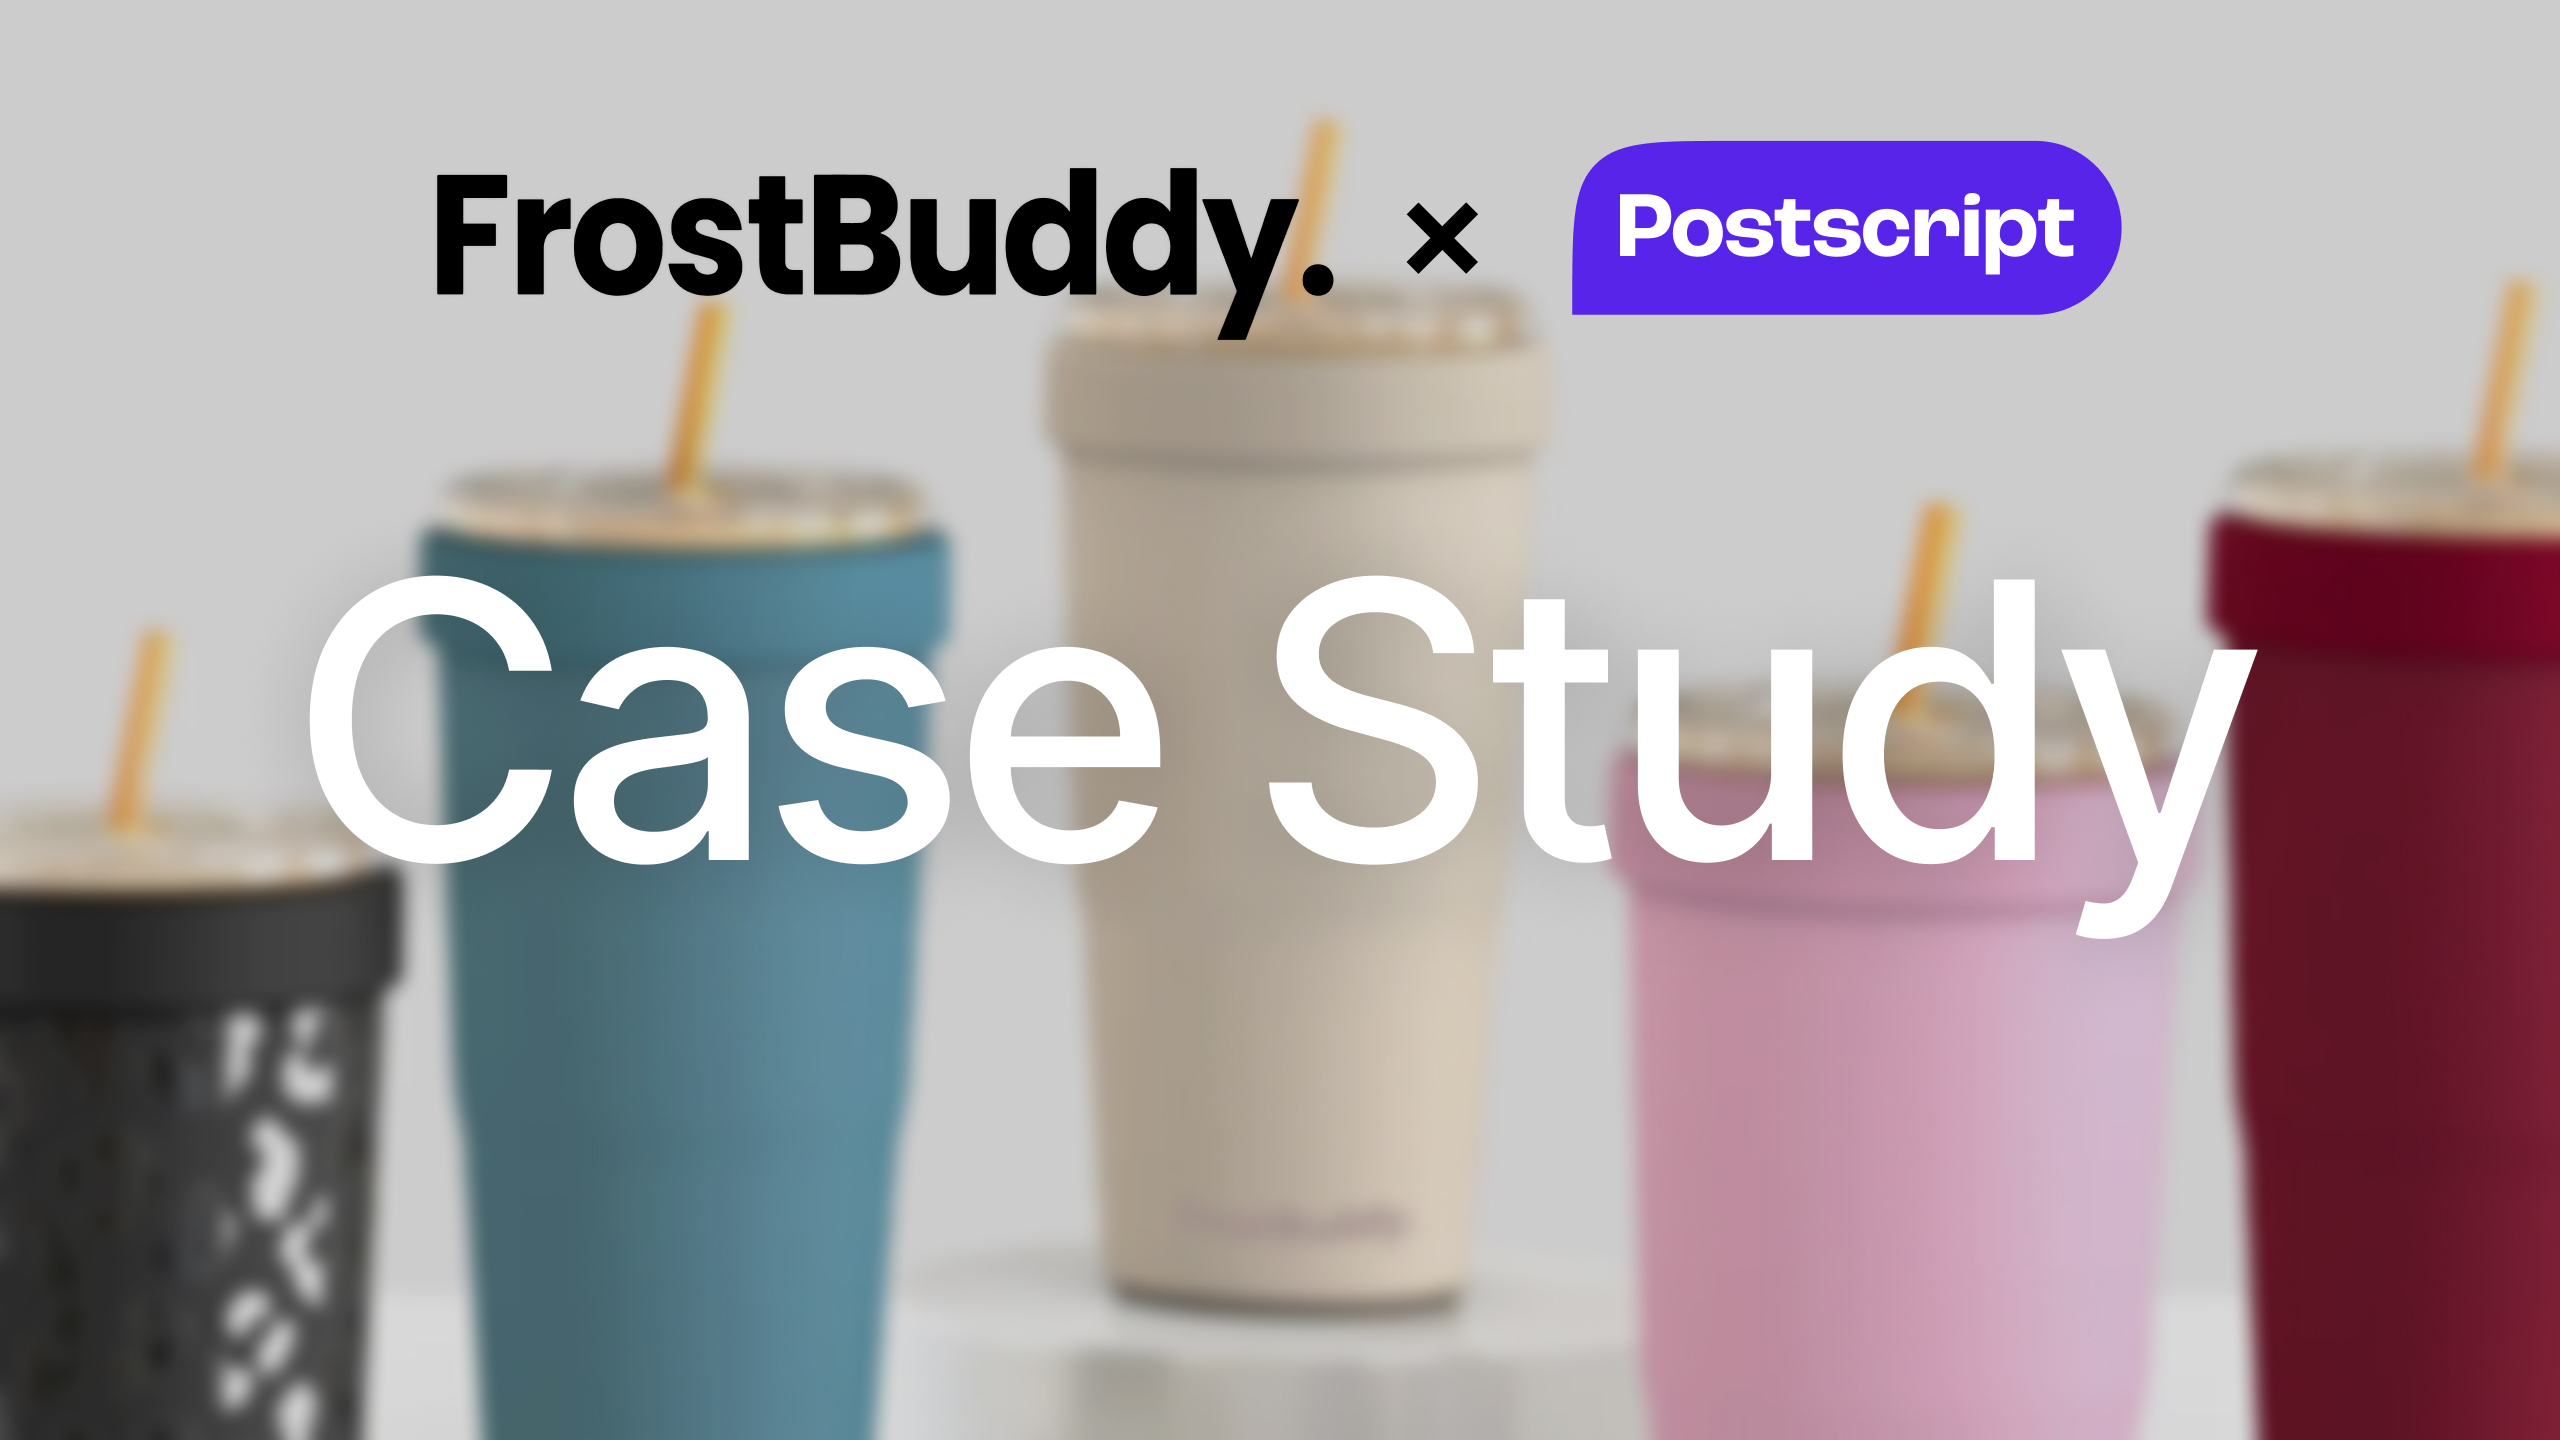 How Frost Buddy Created a Loyal Community Over SMS